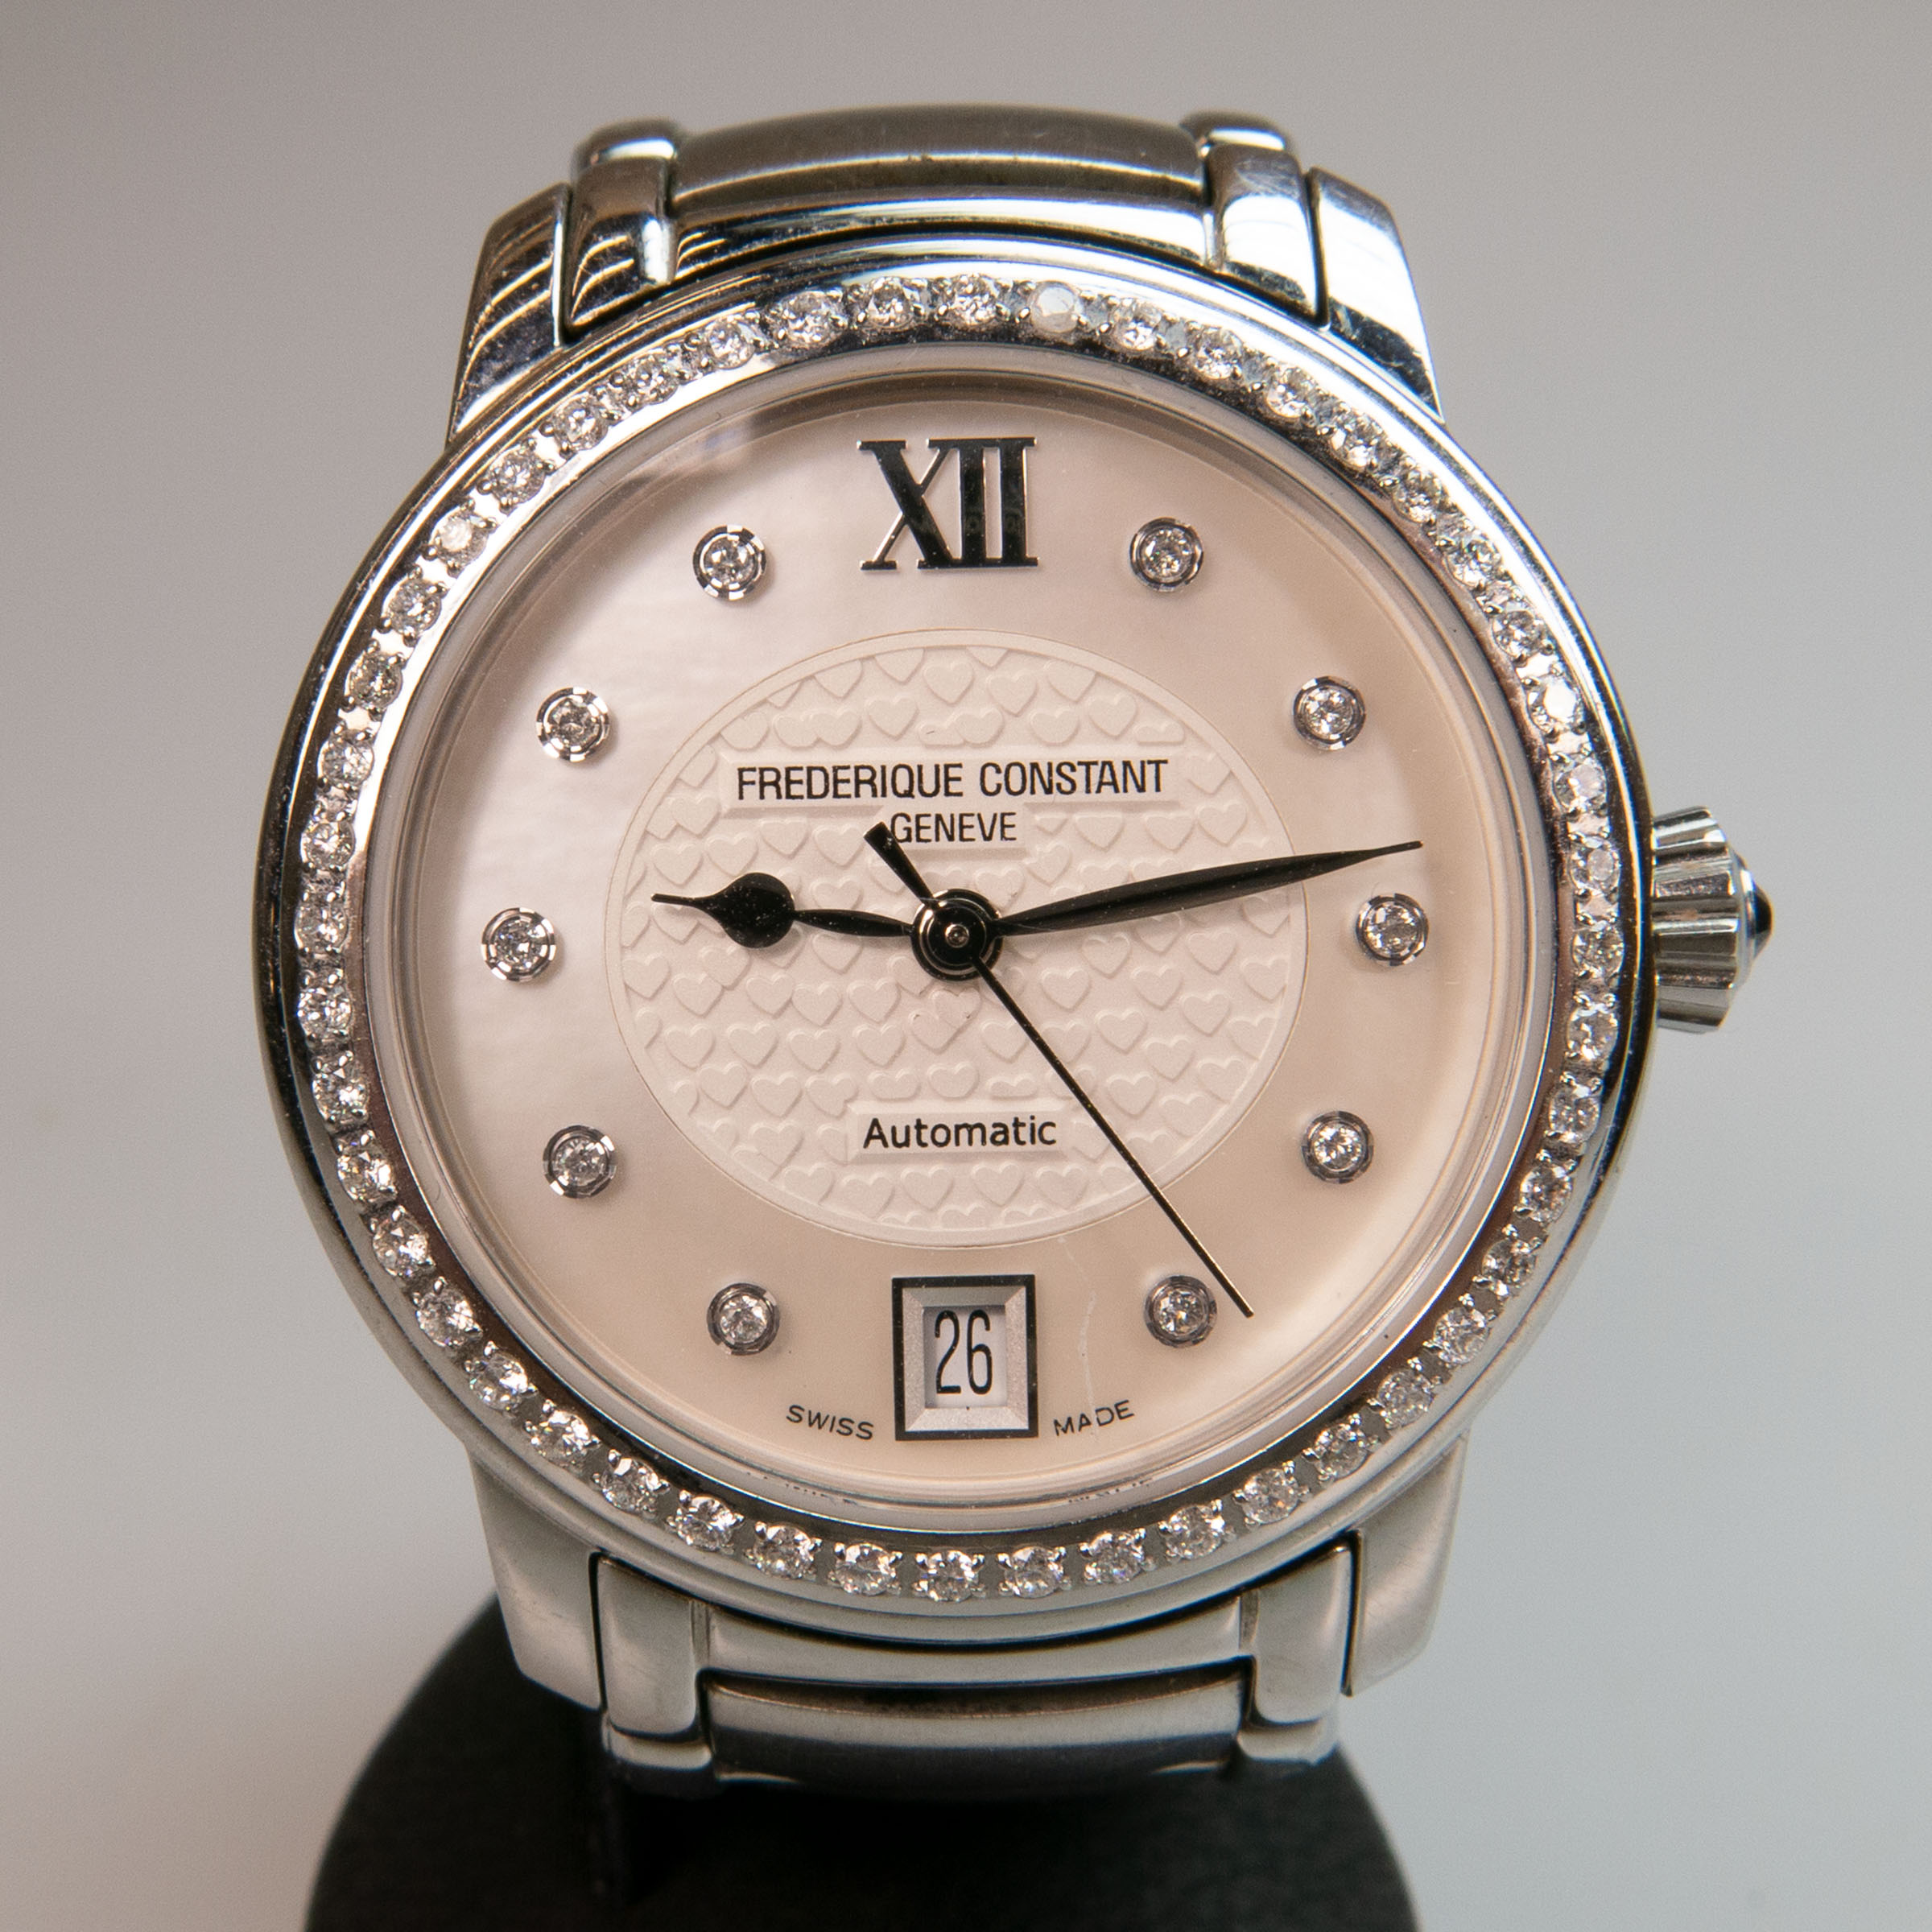 Frederique Constant Wristwatch With Date